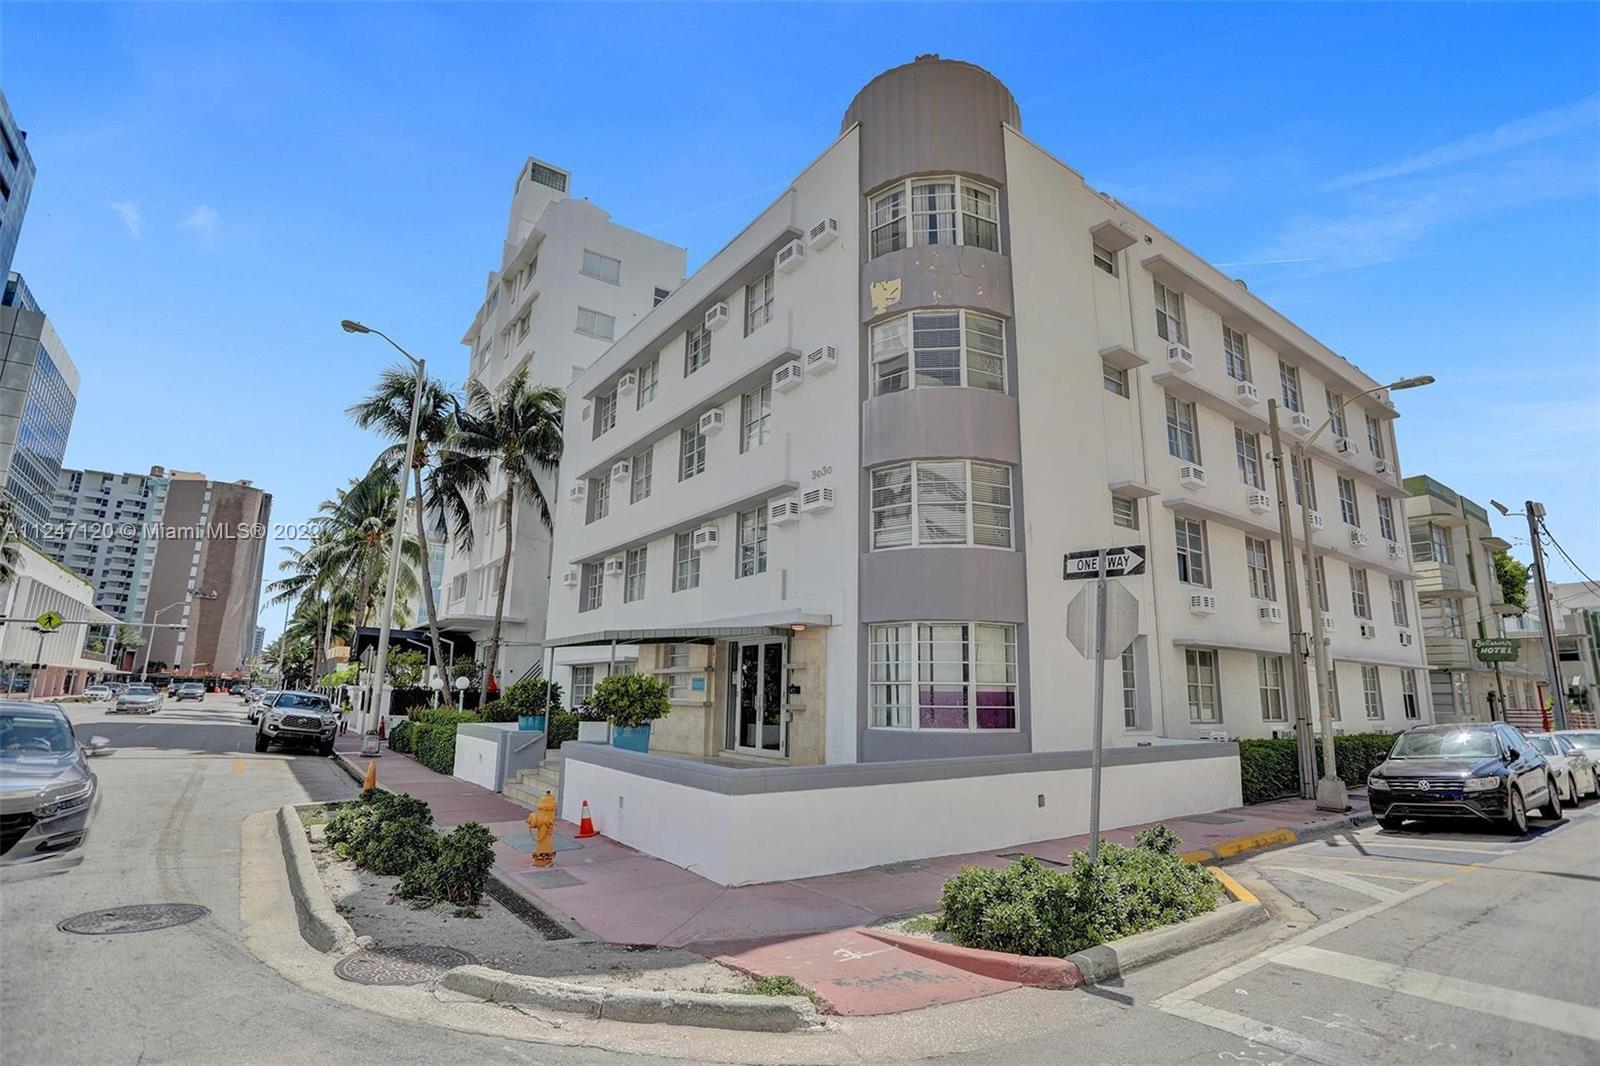 Incredible opportunity to purchase a substantially remodeled one bedroom condo on Collins Ave that a